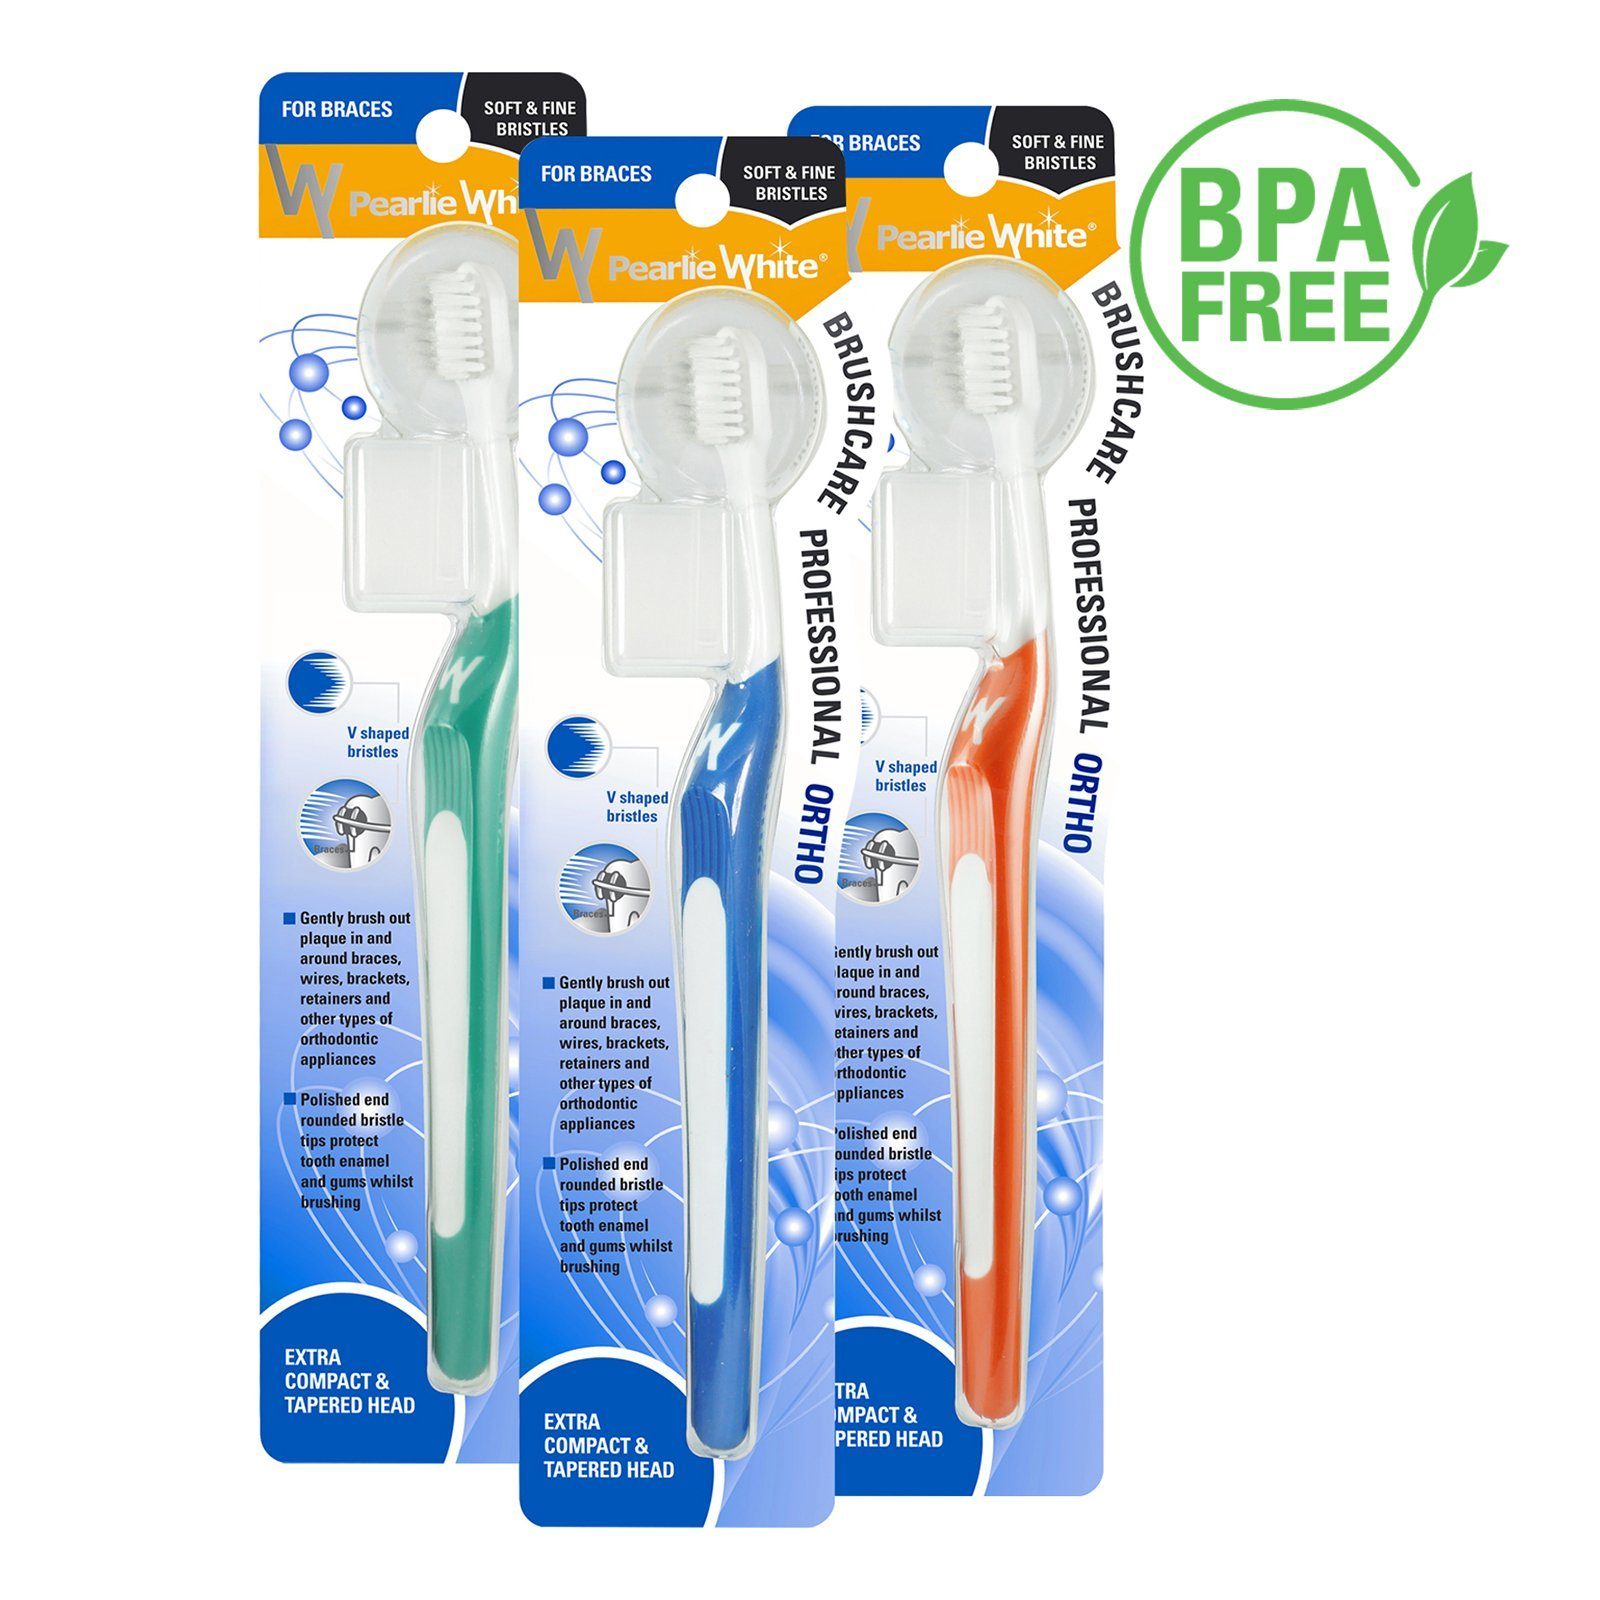 BrushCare Professional Ortho Soft Toothbrush Triple Pack | Little Baby.